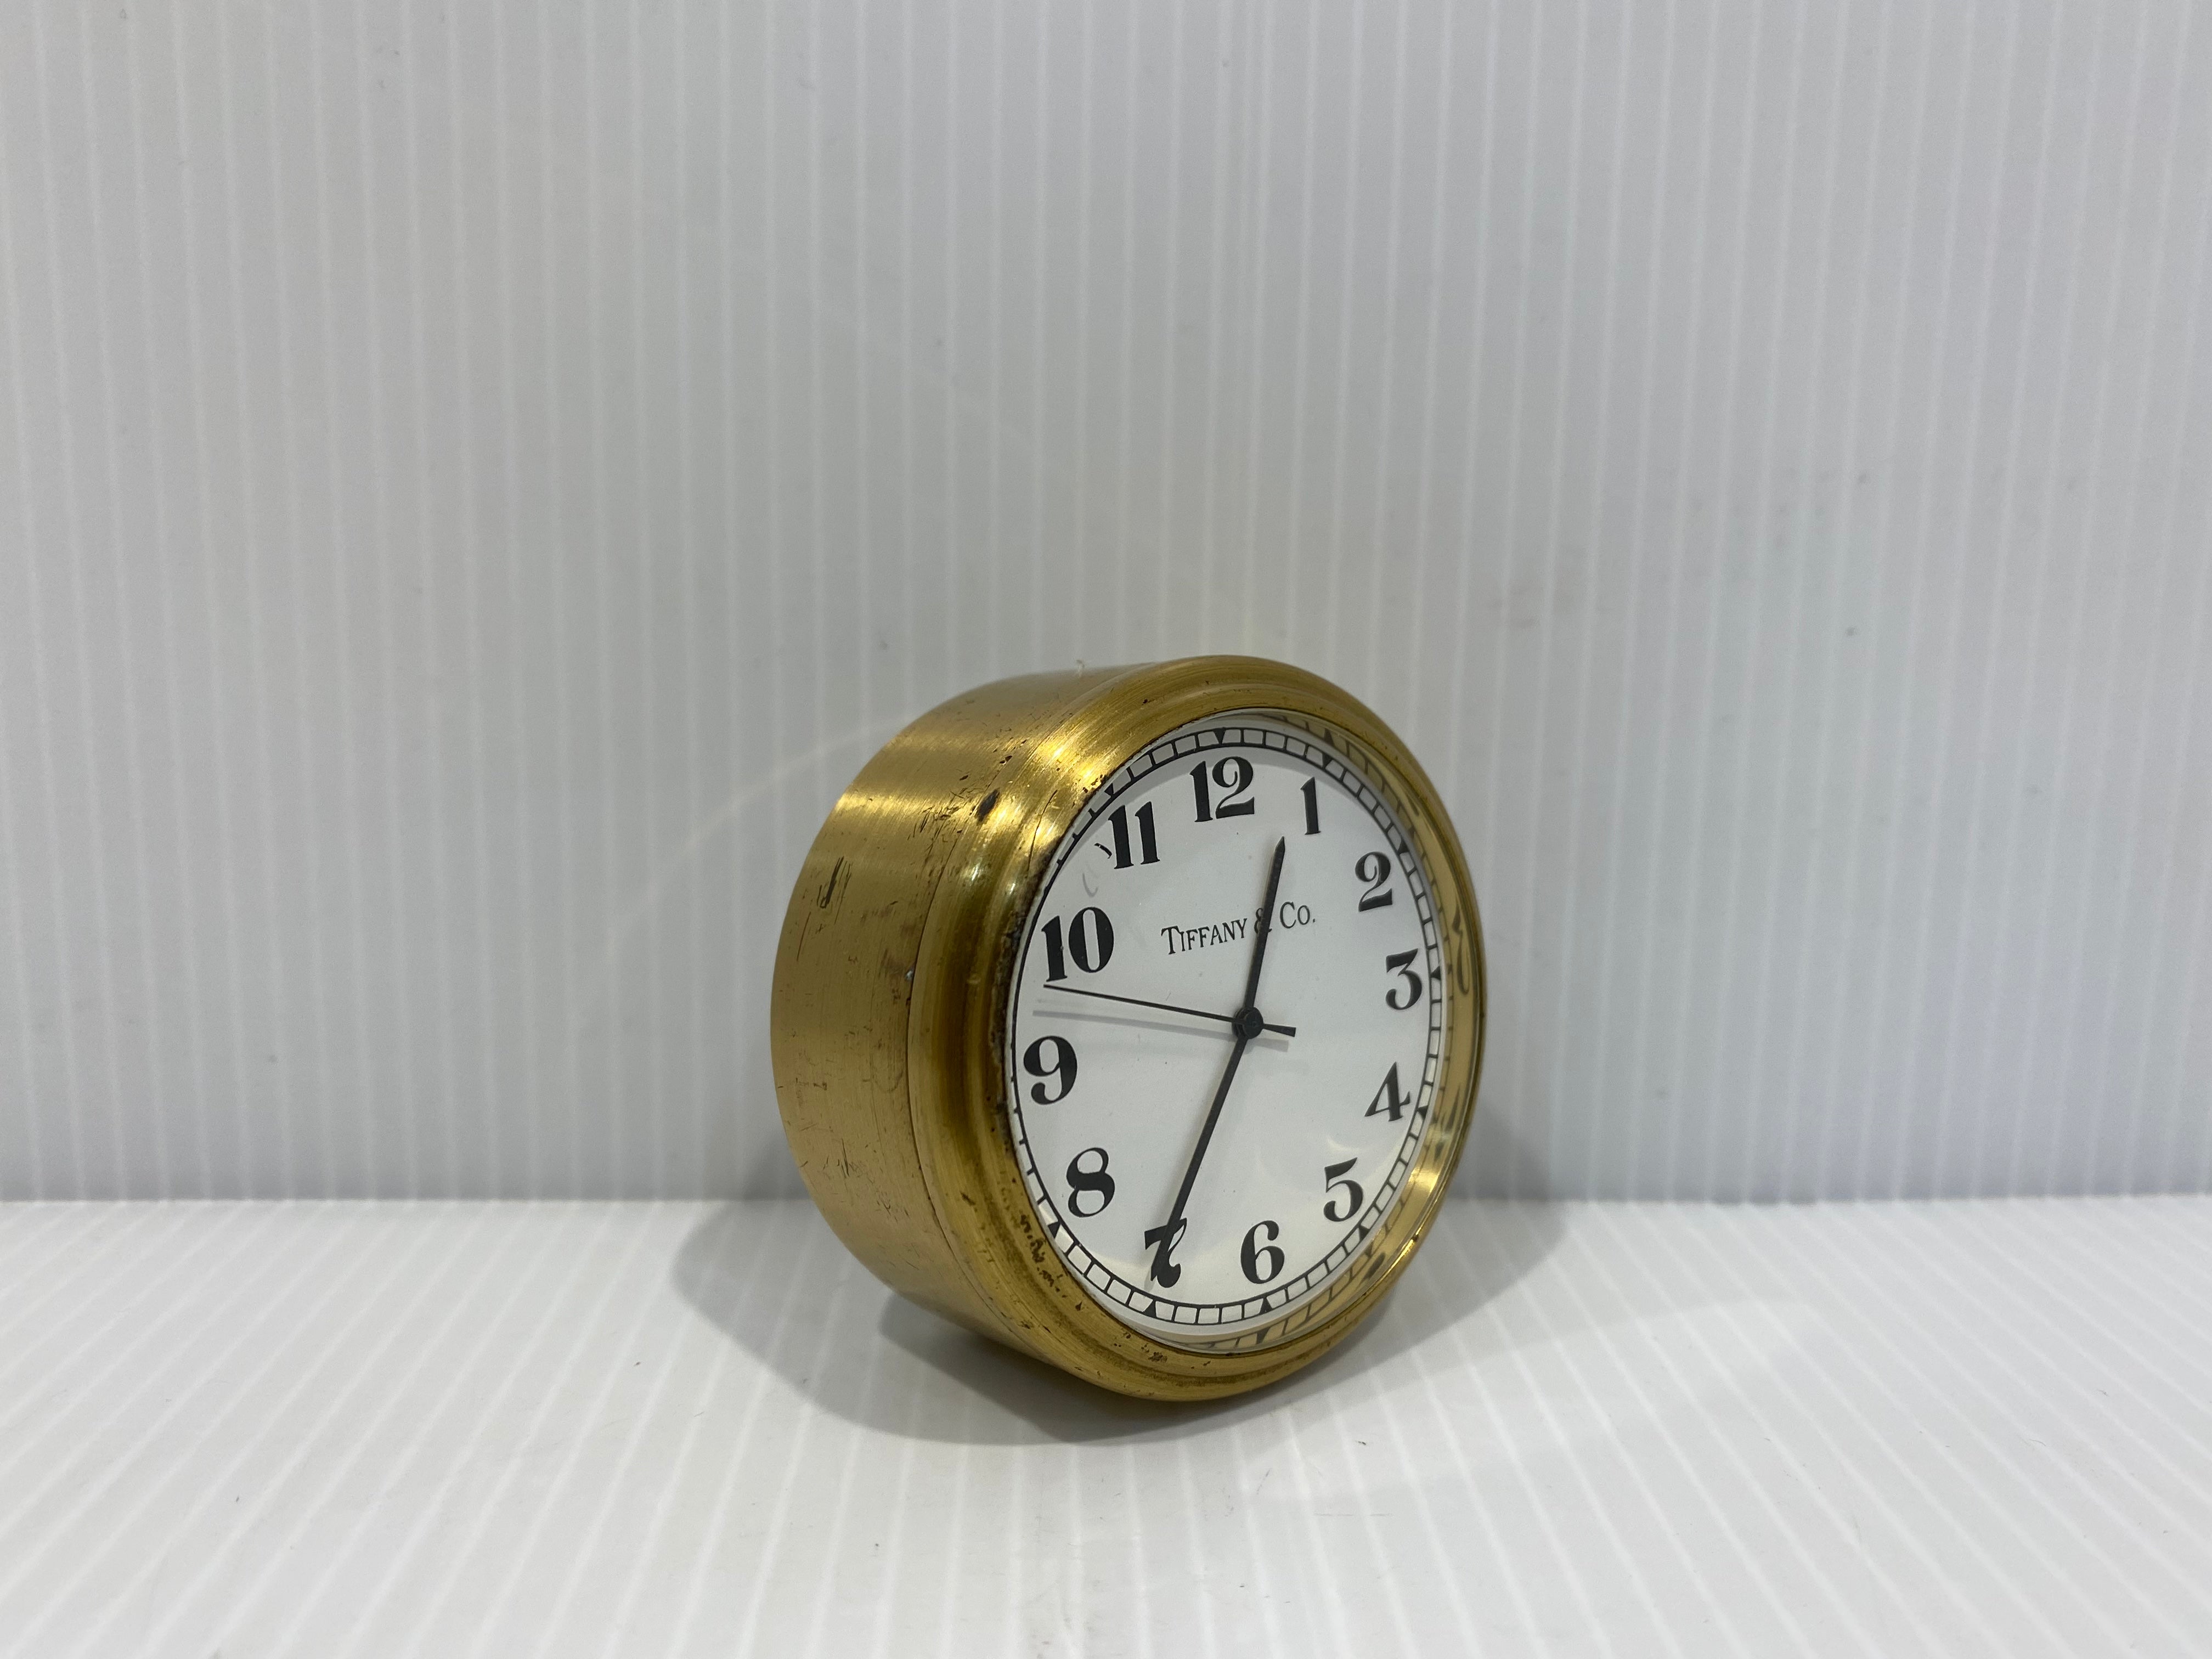 Tiffany & Co. Completely Round Small Brass Guartz Desk Clock With Alarm.